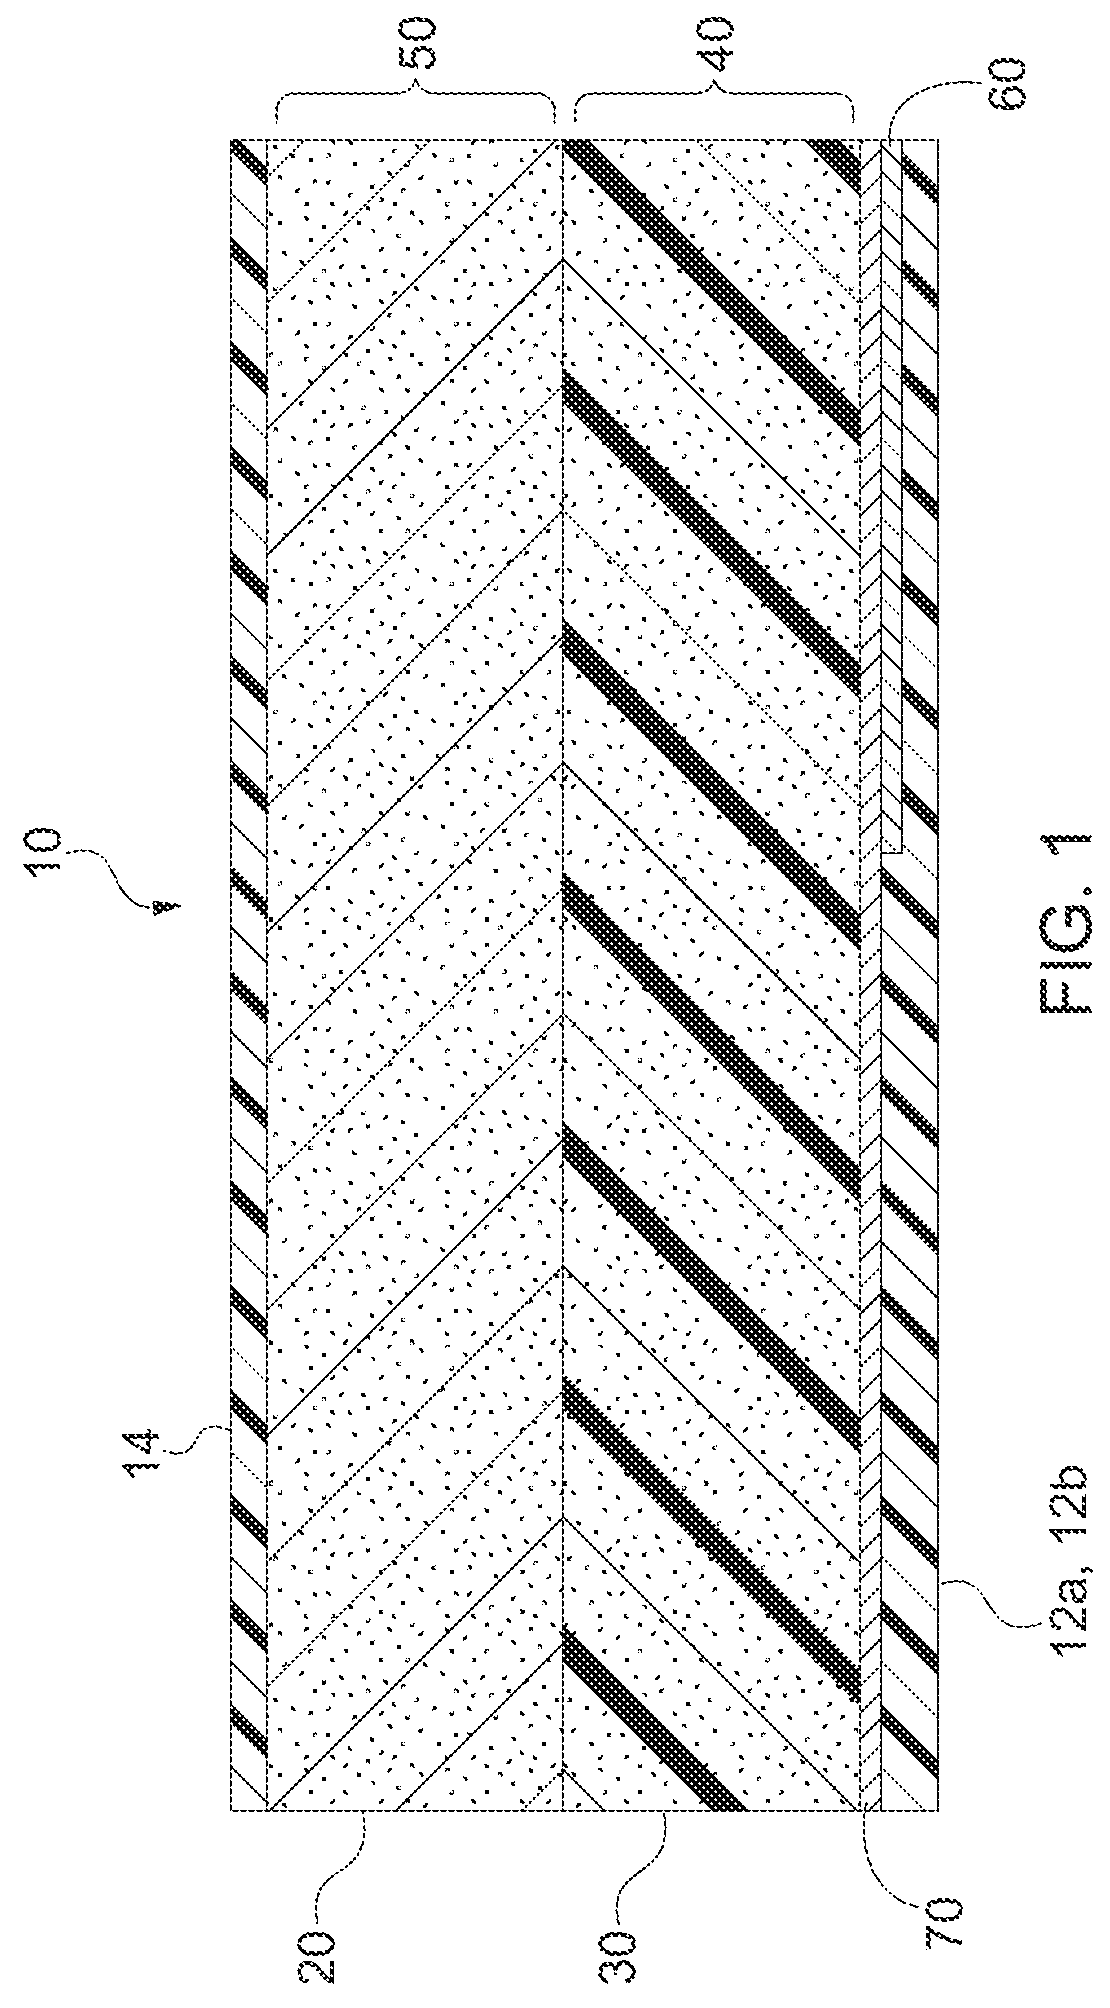 Composite electrode for flow battery